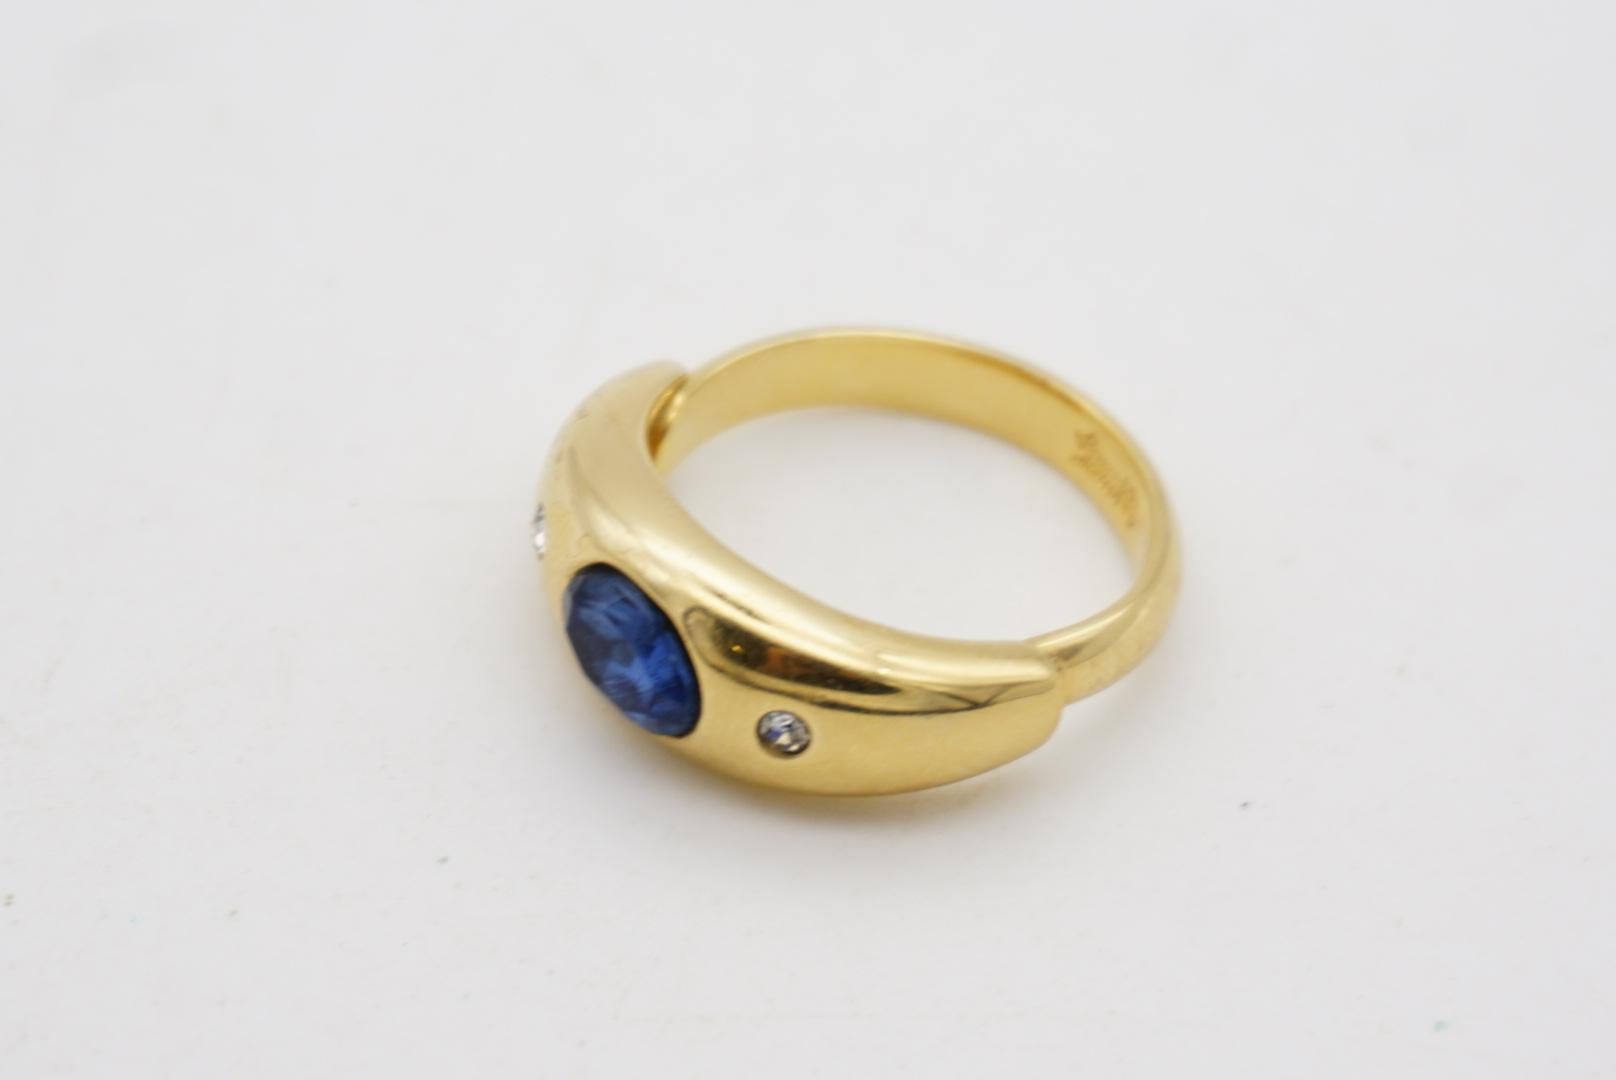 Christian Dior GROSSE 1960s Sapphire Navy Oval Crystal Charm Band Ring US 7 1/2 5